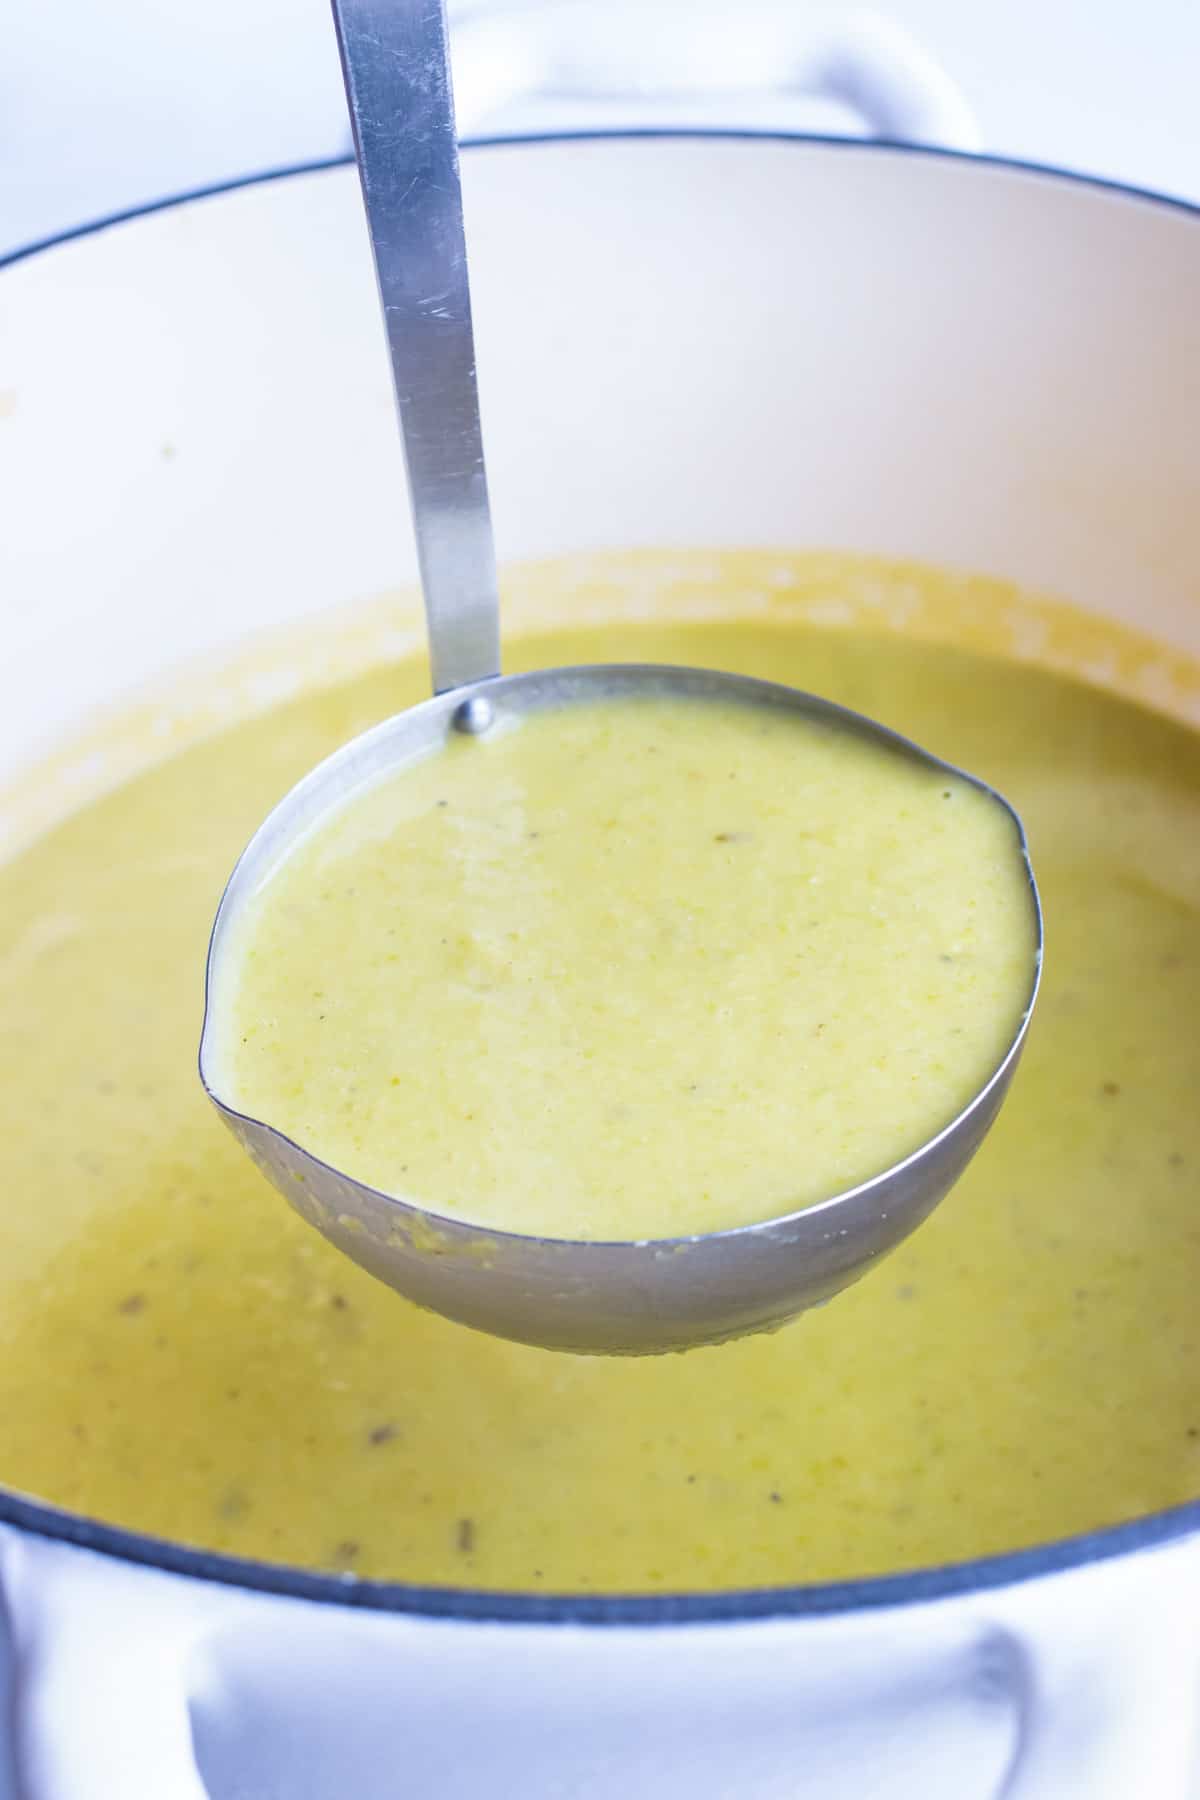 A ladle scooping out a serving of vegan asparagus soup from a white pot.